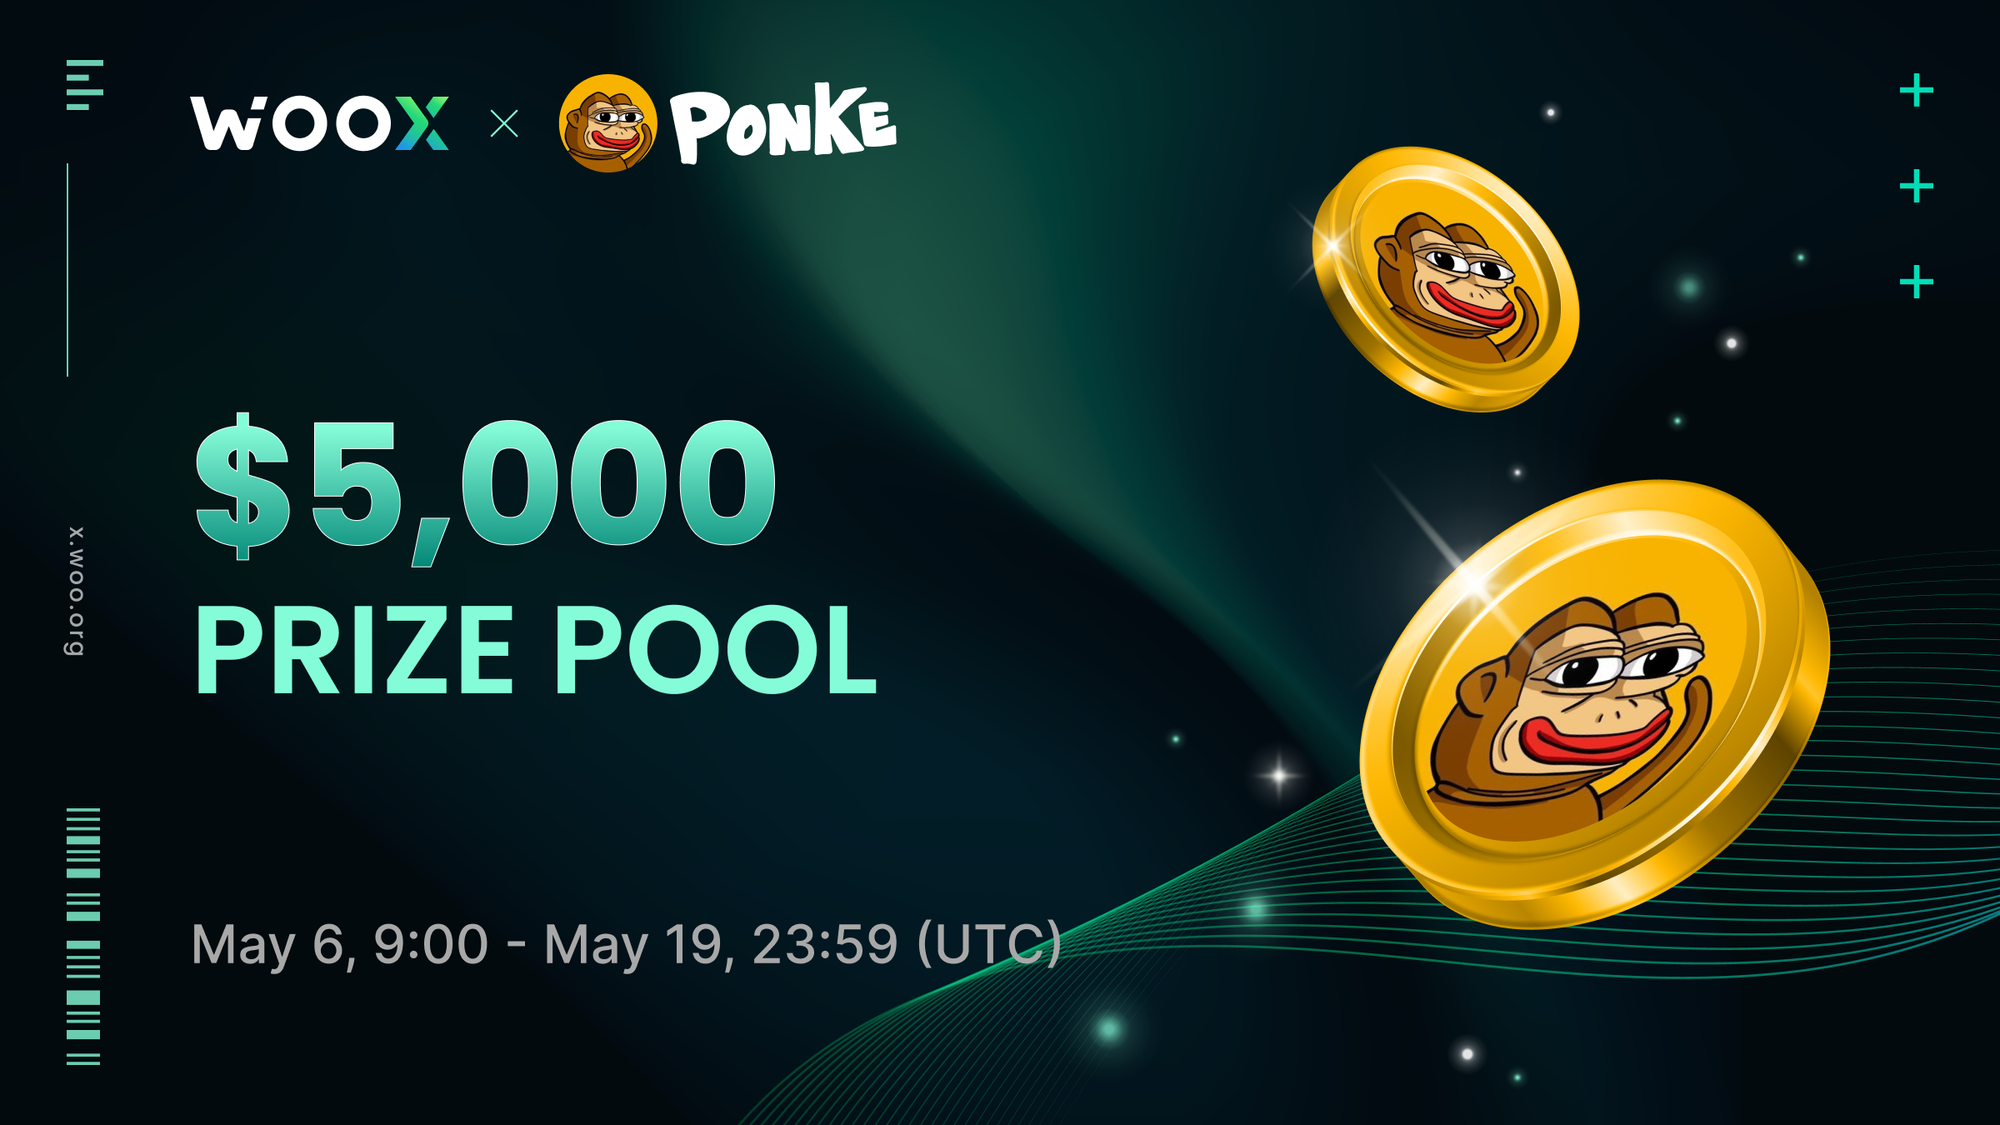 Dive into our trading event and win a $5,000 PONKE prize pool!